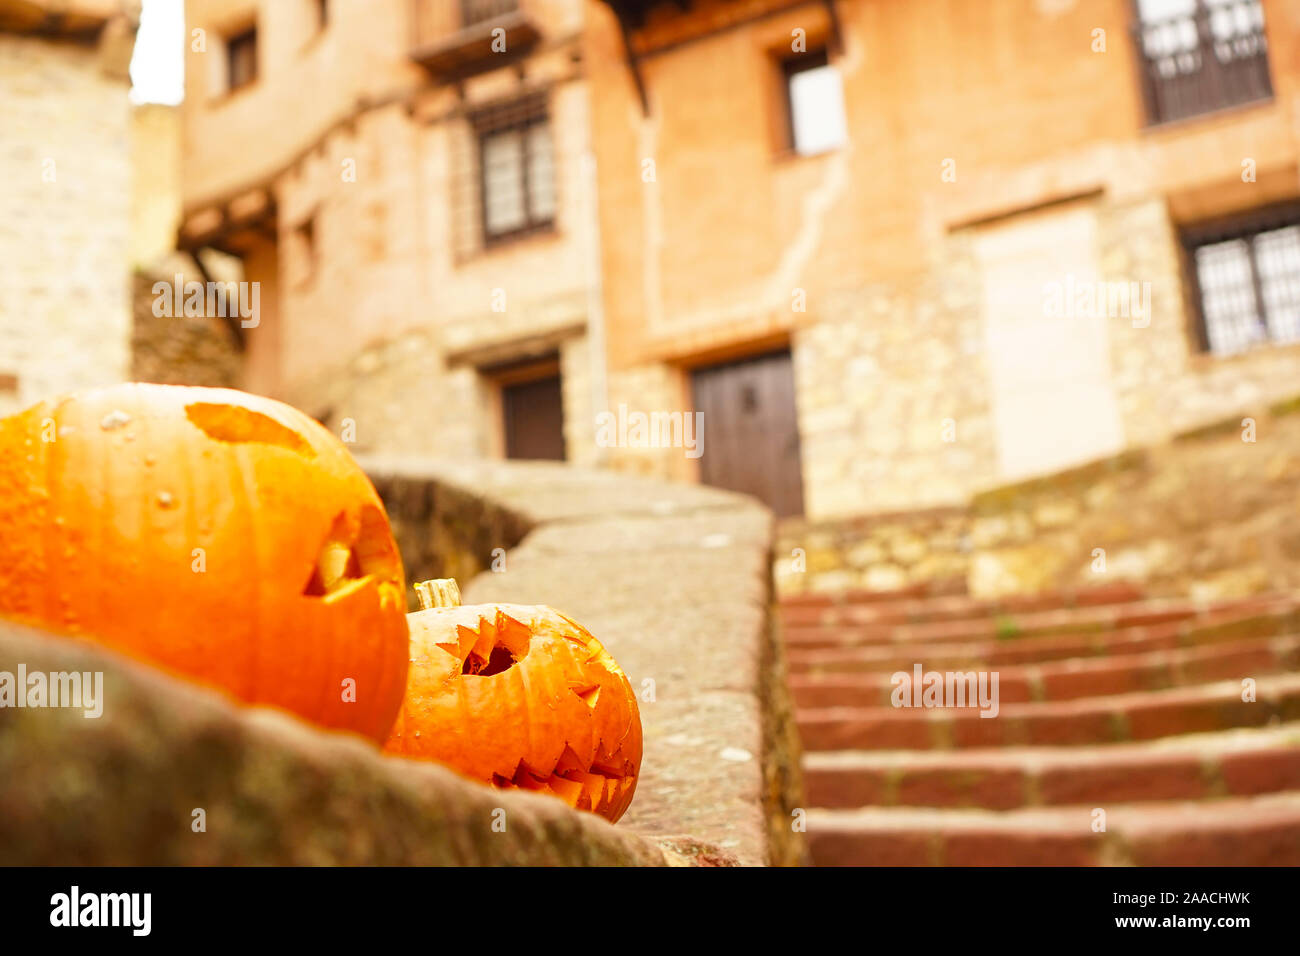 Halloween pumpkins on display in an old Spanish villlage on October 31st Stock Photo